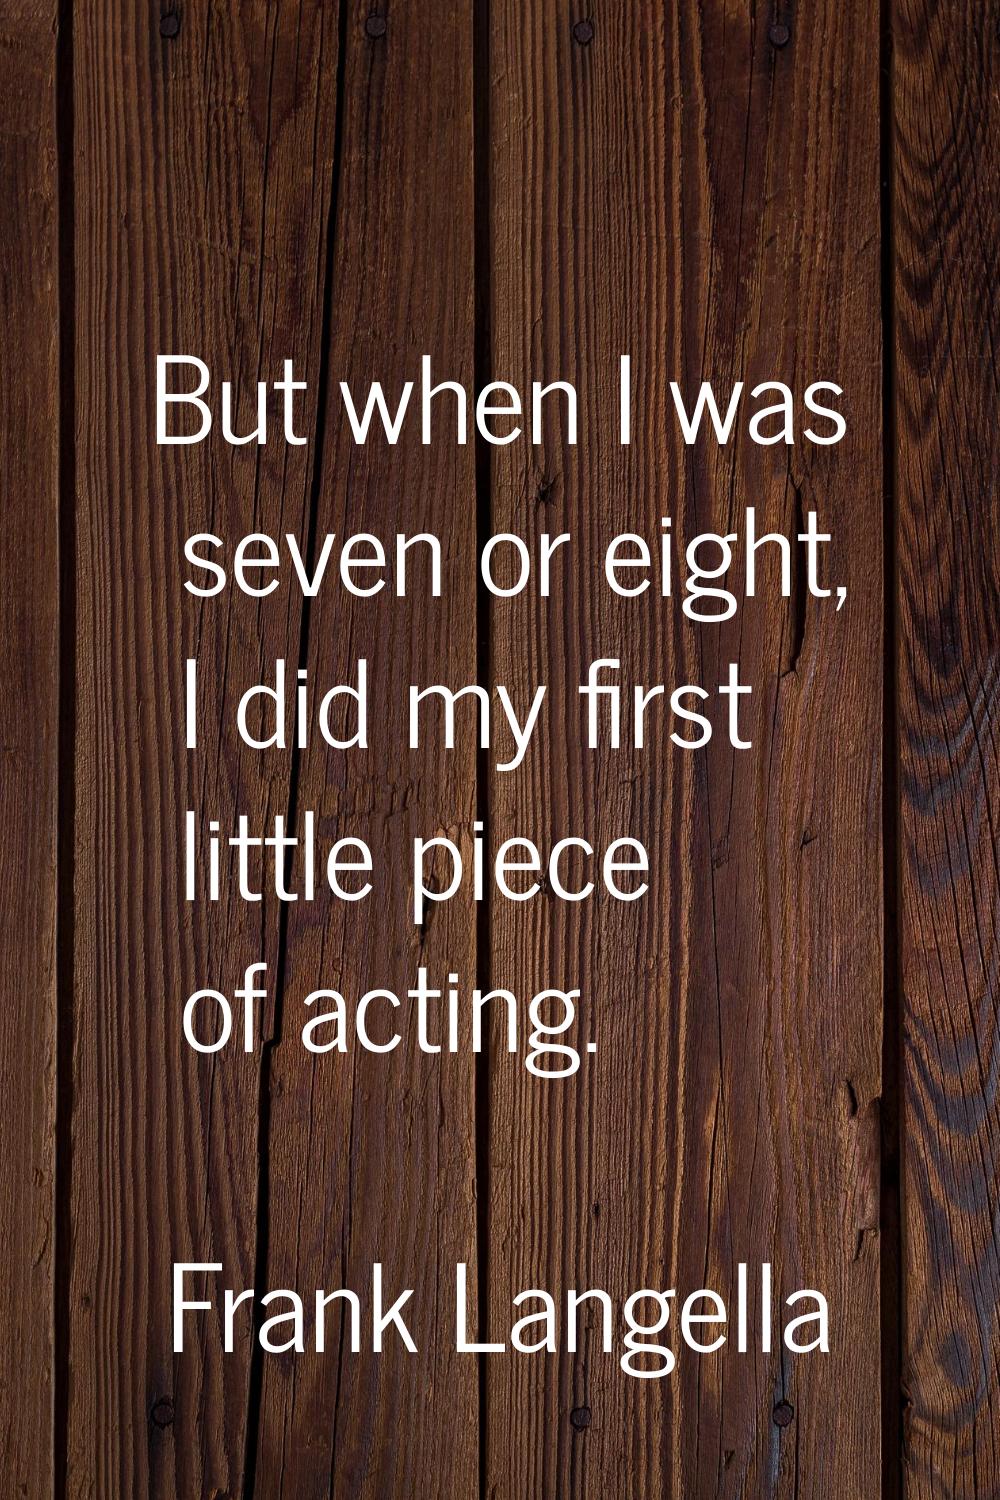 But when I was seven or eight, I did my first little piece of acting.